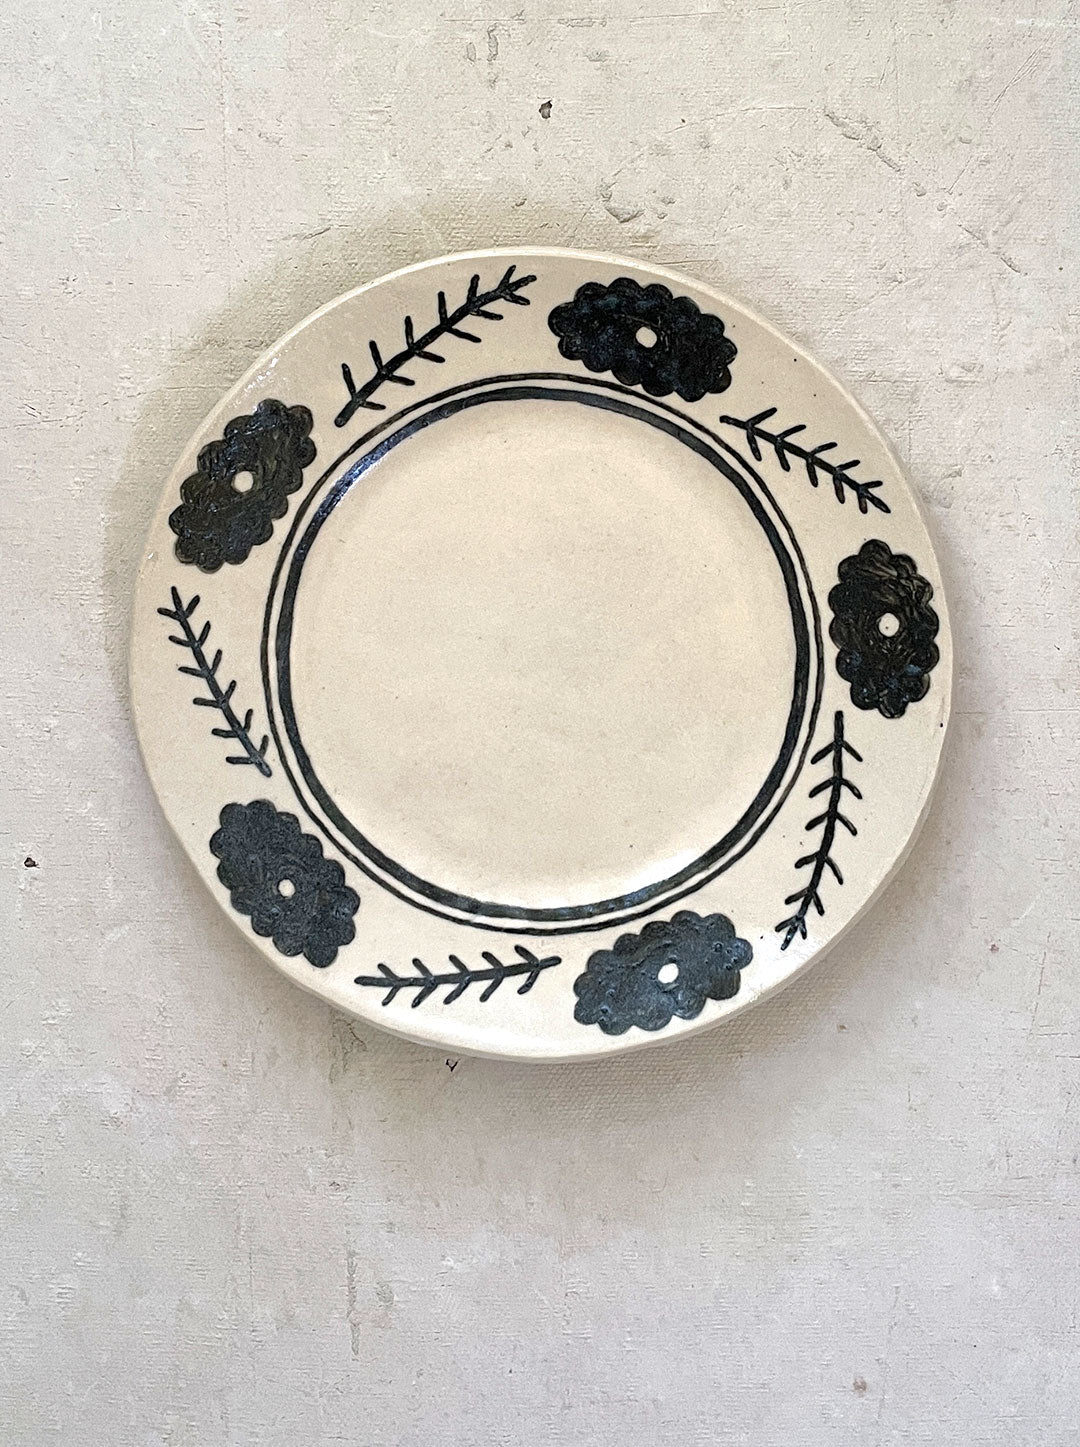 CHARCOAL GREY FLORAL SIDE PLATE